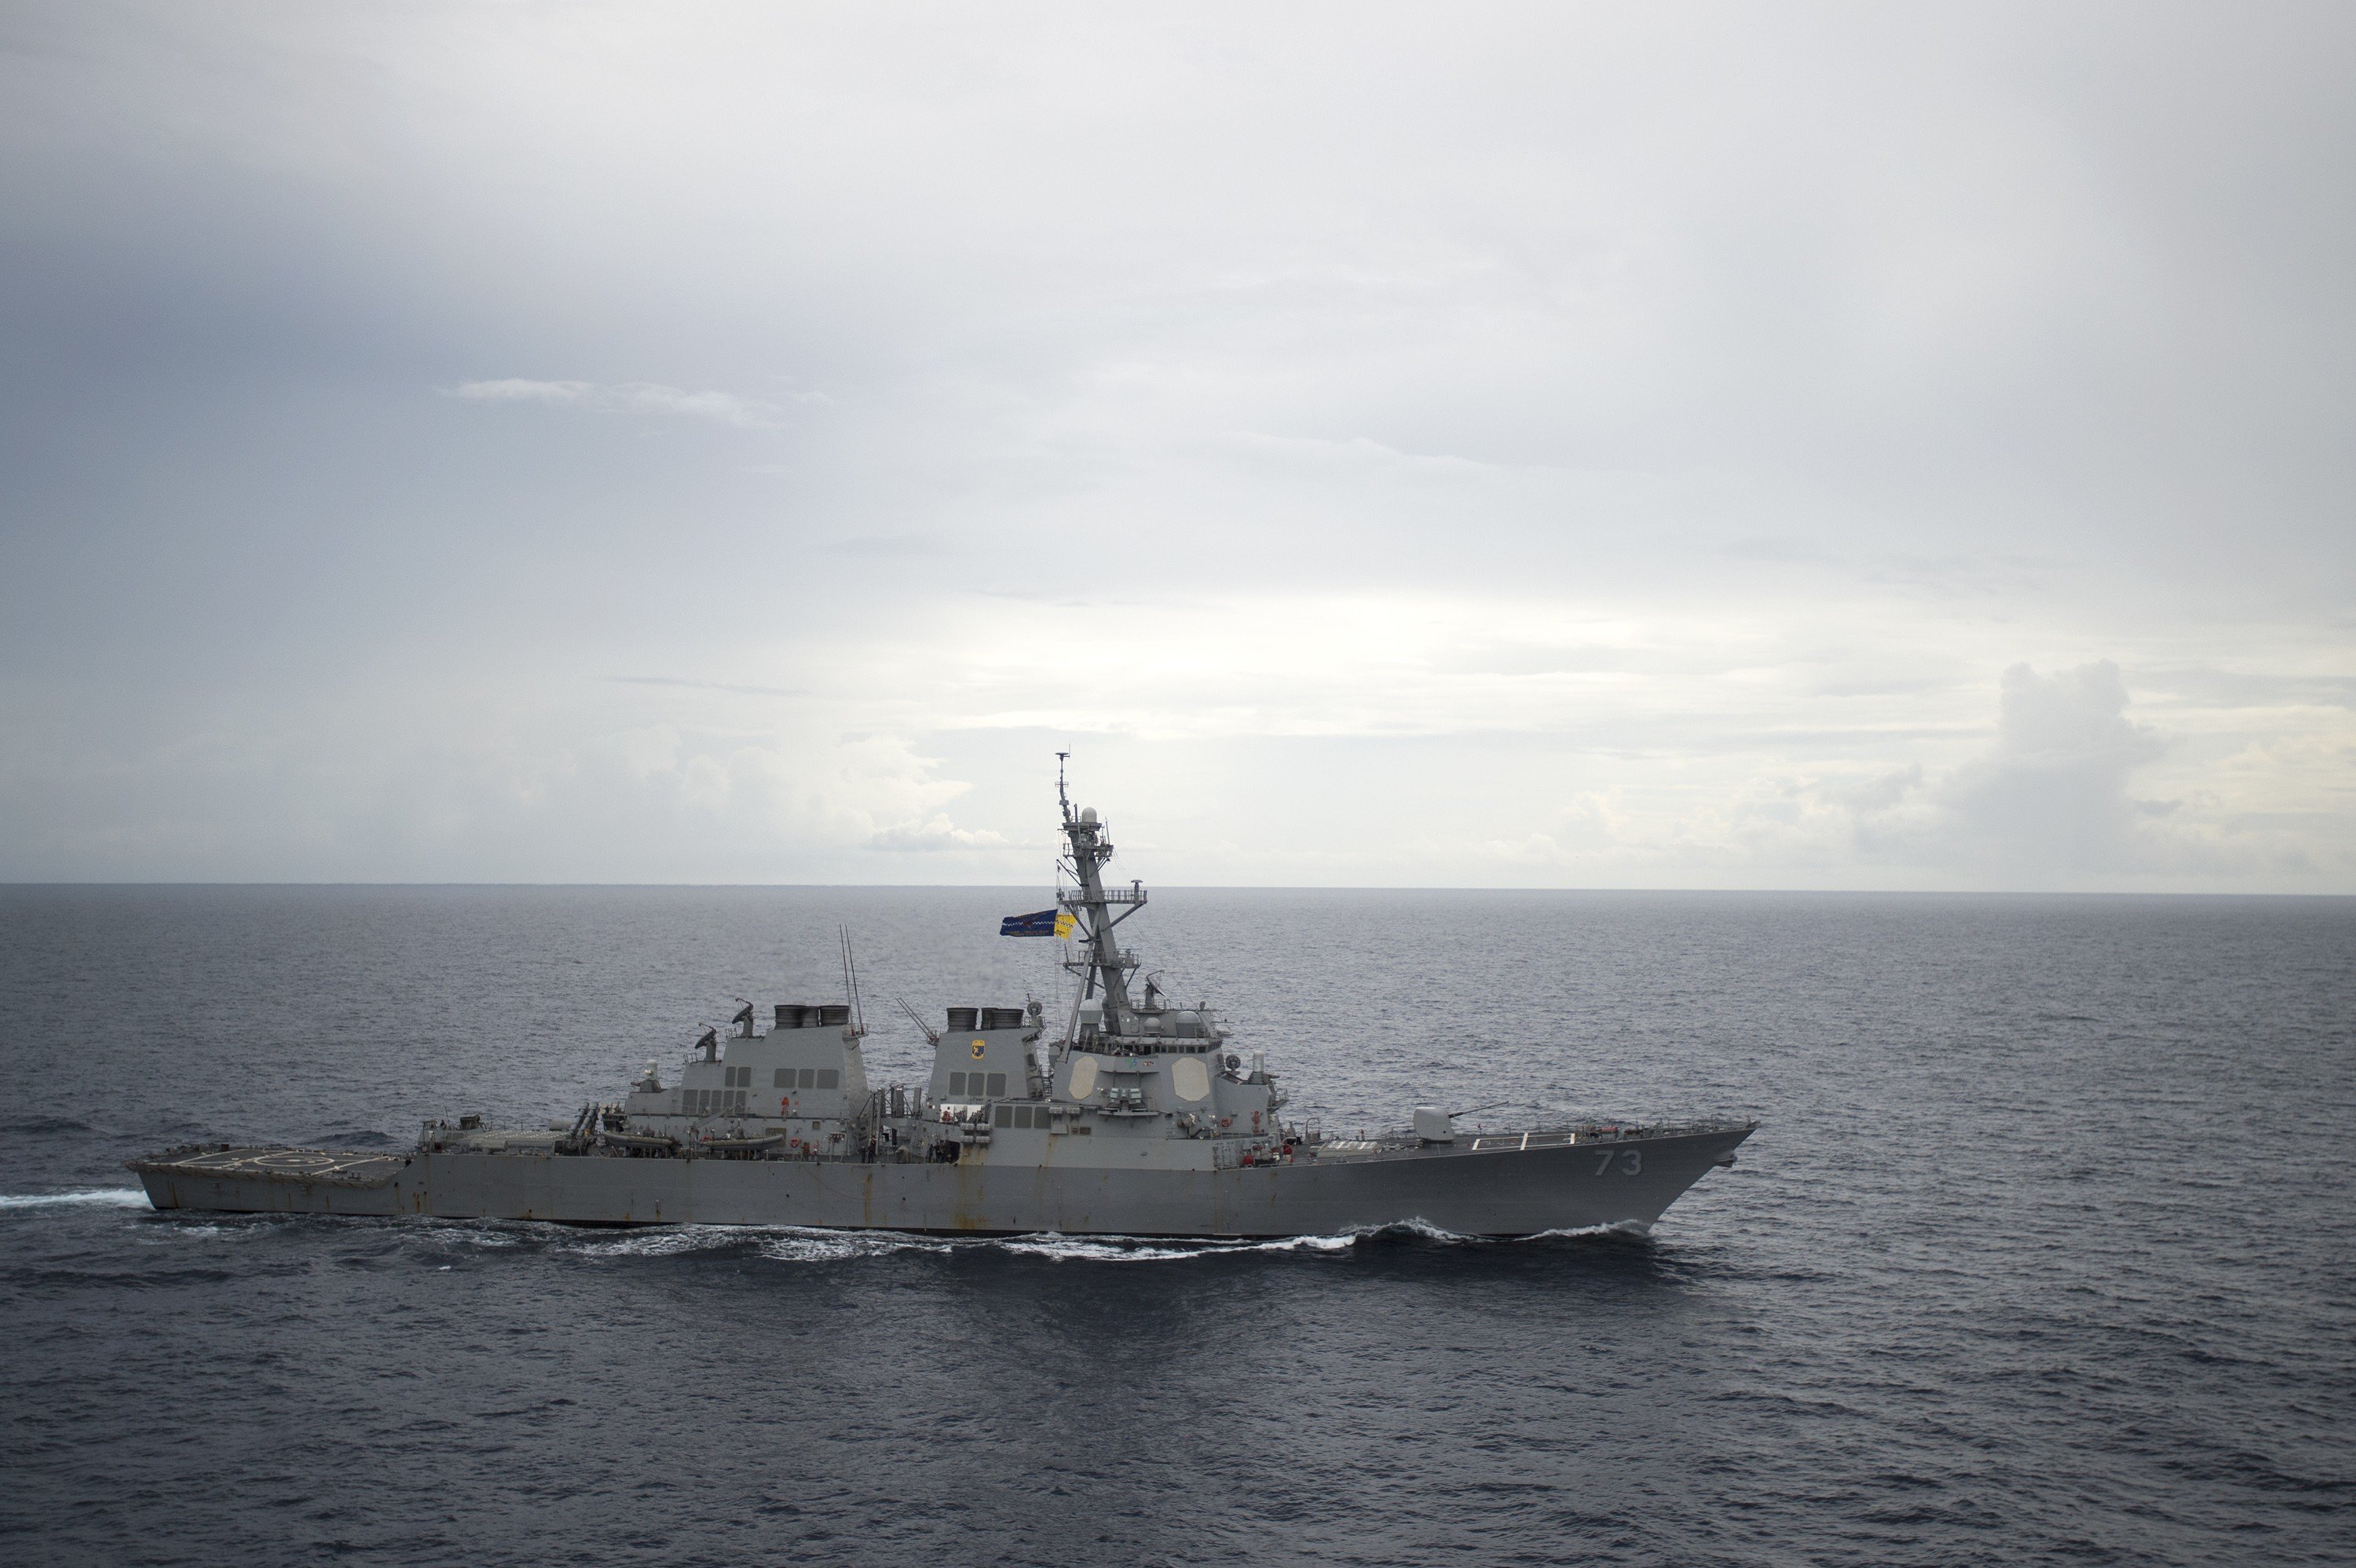 In this October 13, 2016 photo provided by the US Navy, the guided-missile destroyer USS Decatur operates in the South China Sea as part of the Bonhomme Richard Expeditionary Strike Group. Photo: AP